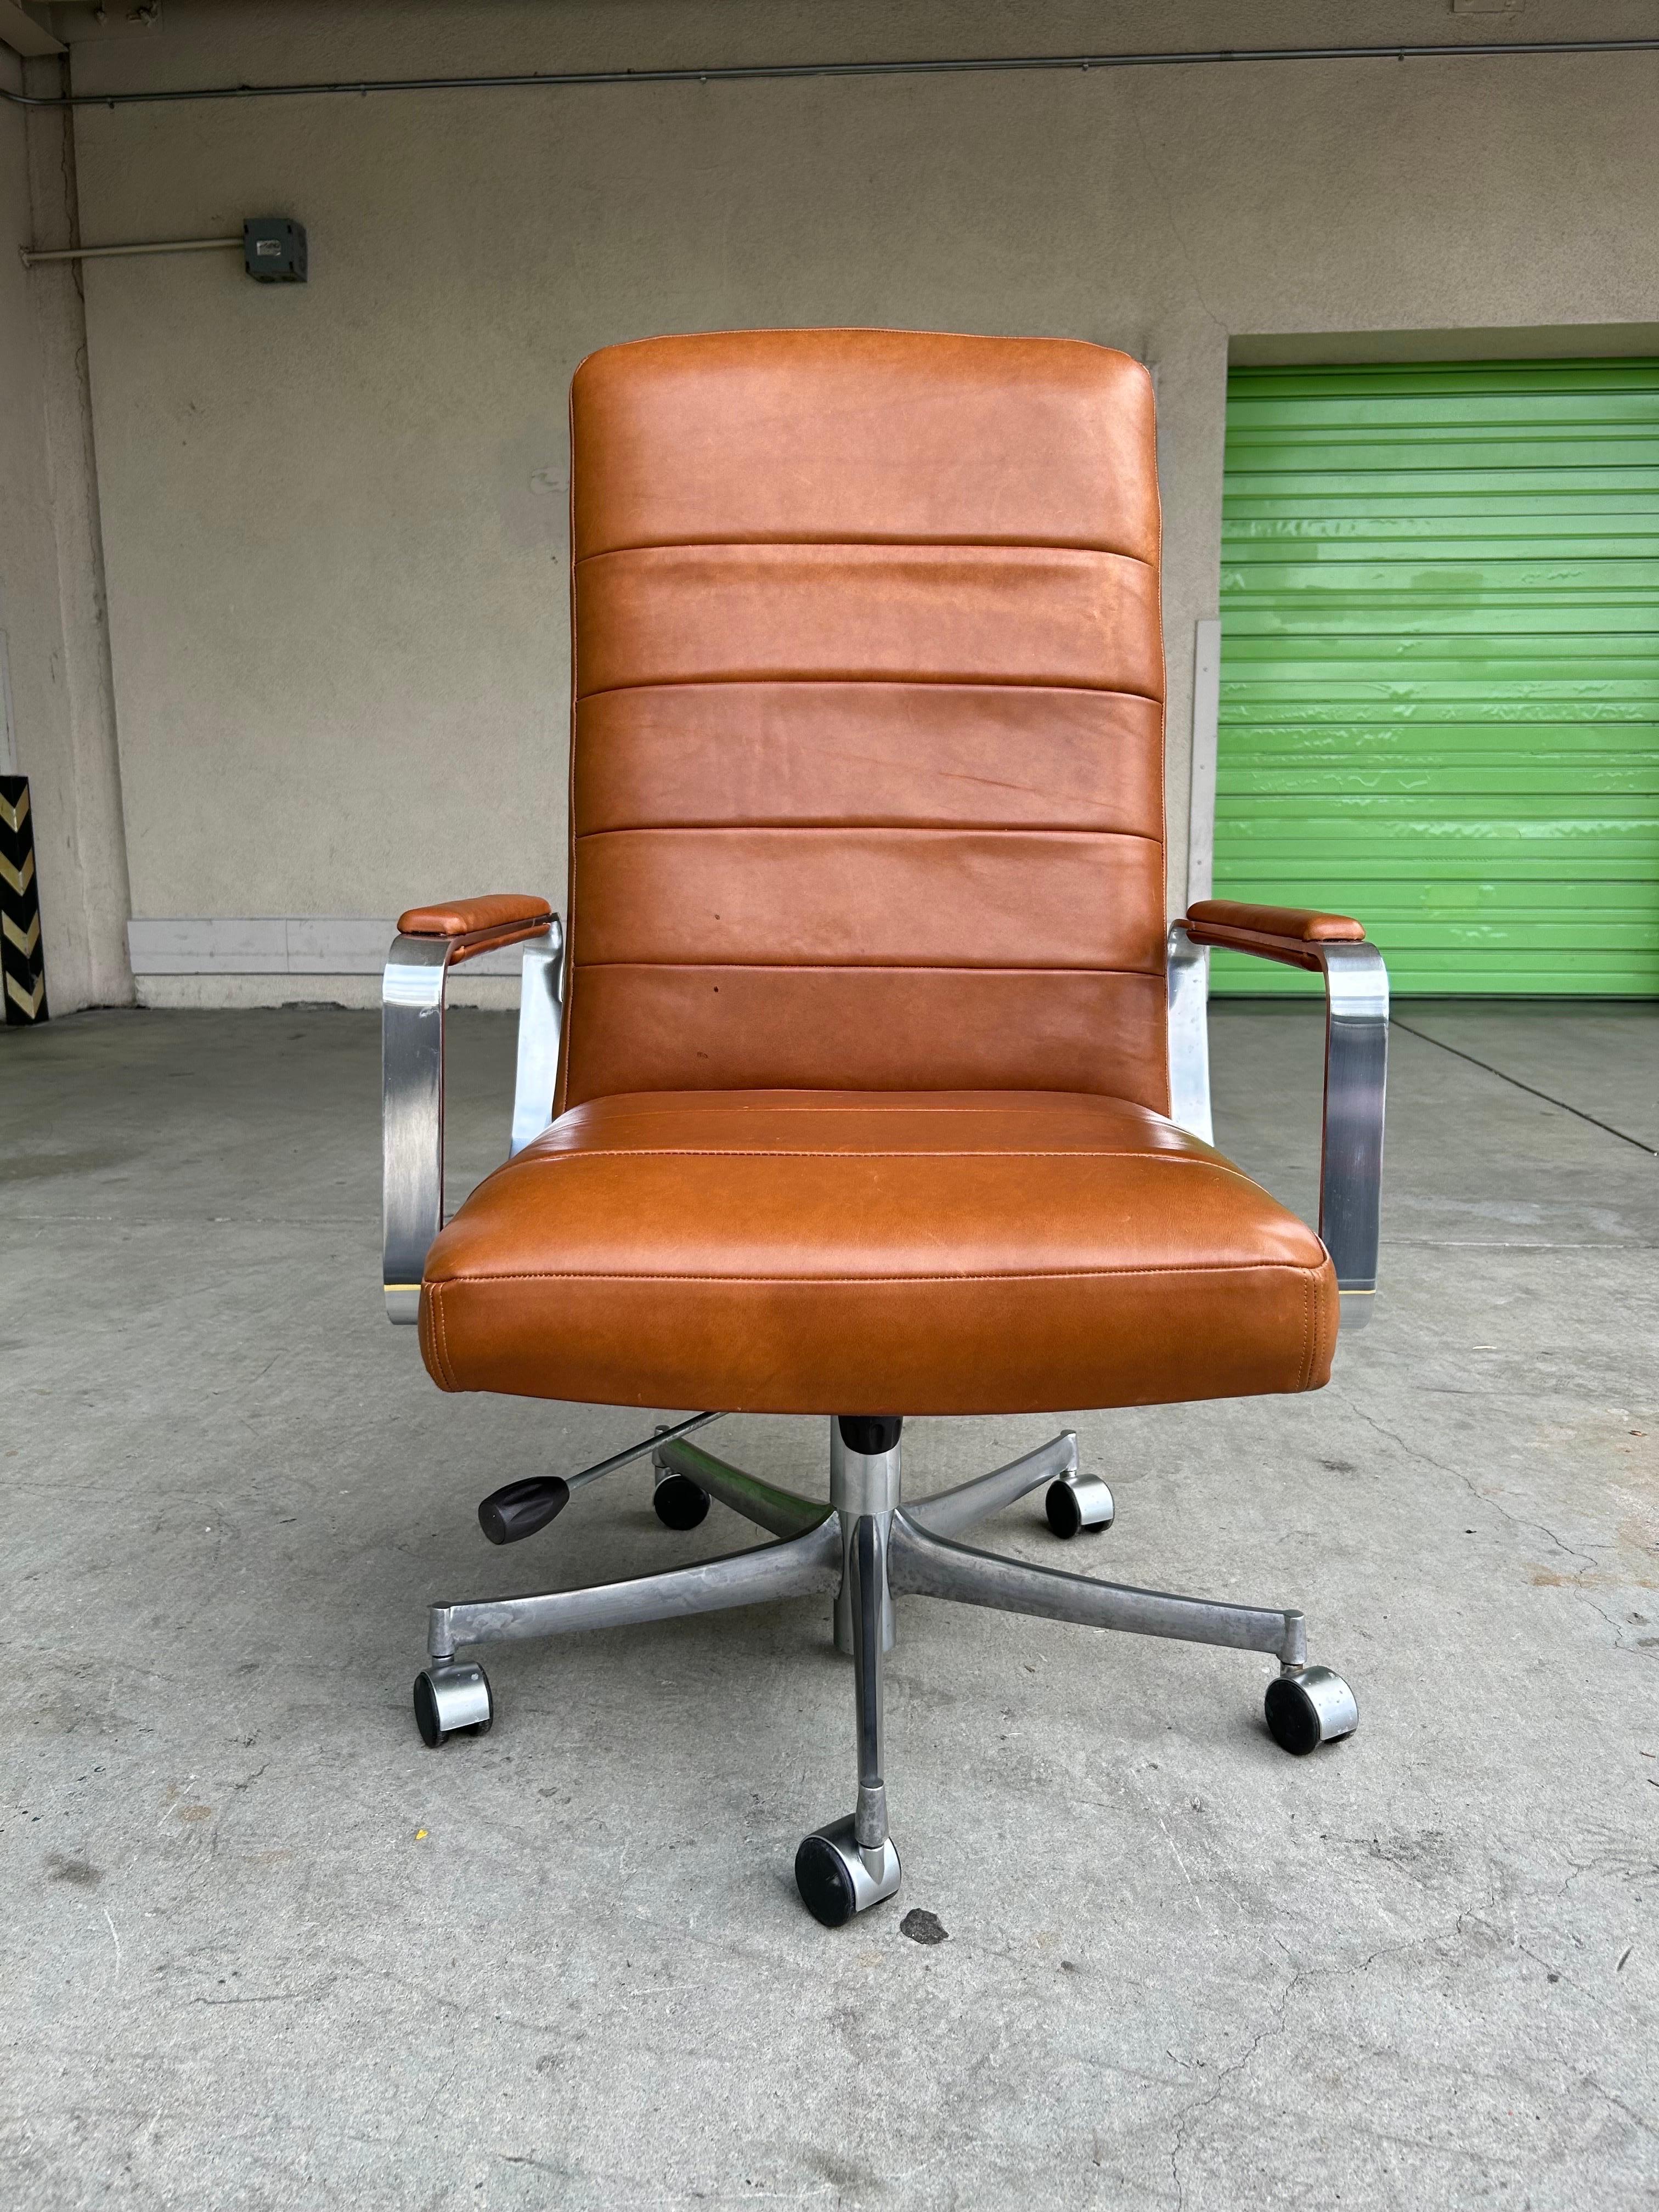 Elegant modernist design.
Wood construction with leather and chrome plated steel armrest with brushed aluminum base and plastic castors.
(The up + down hardware under the seat appears to not work and needs to be tweaked a bit or left as is. It does